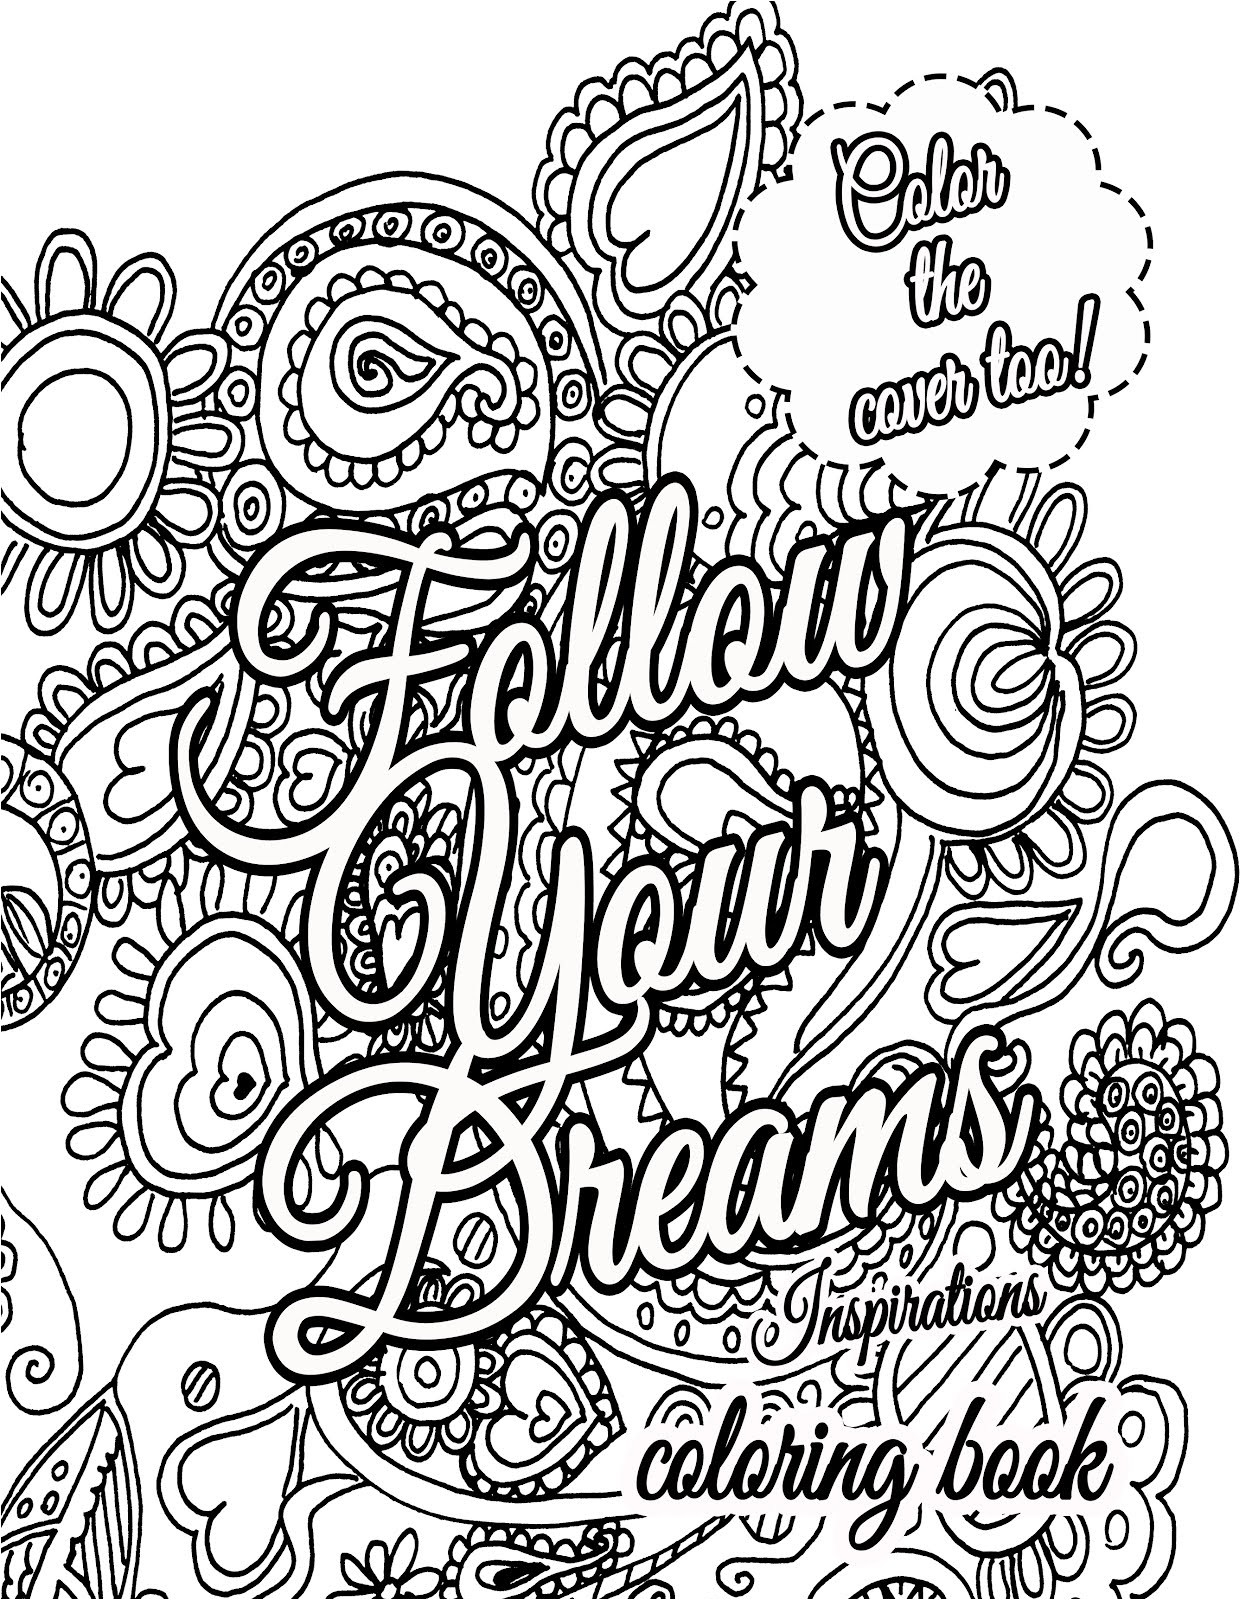 free-printable-adult-coloring-pages-with-11-inspirational-quotes